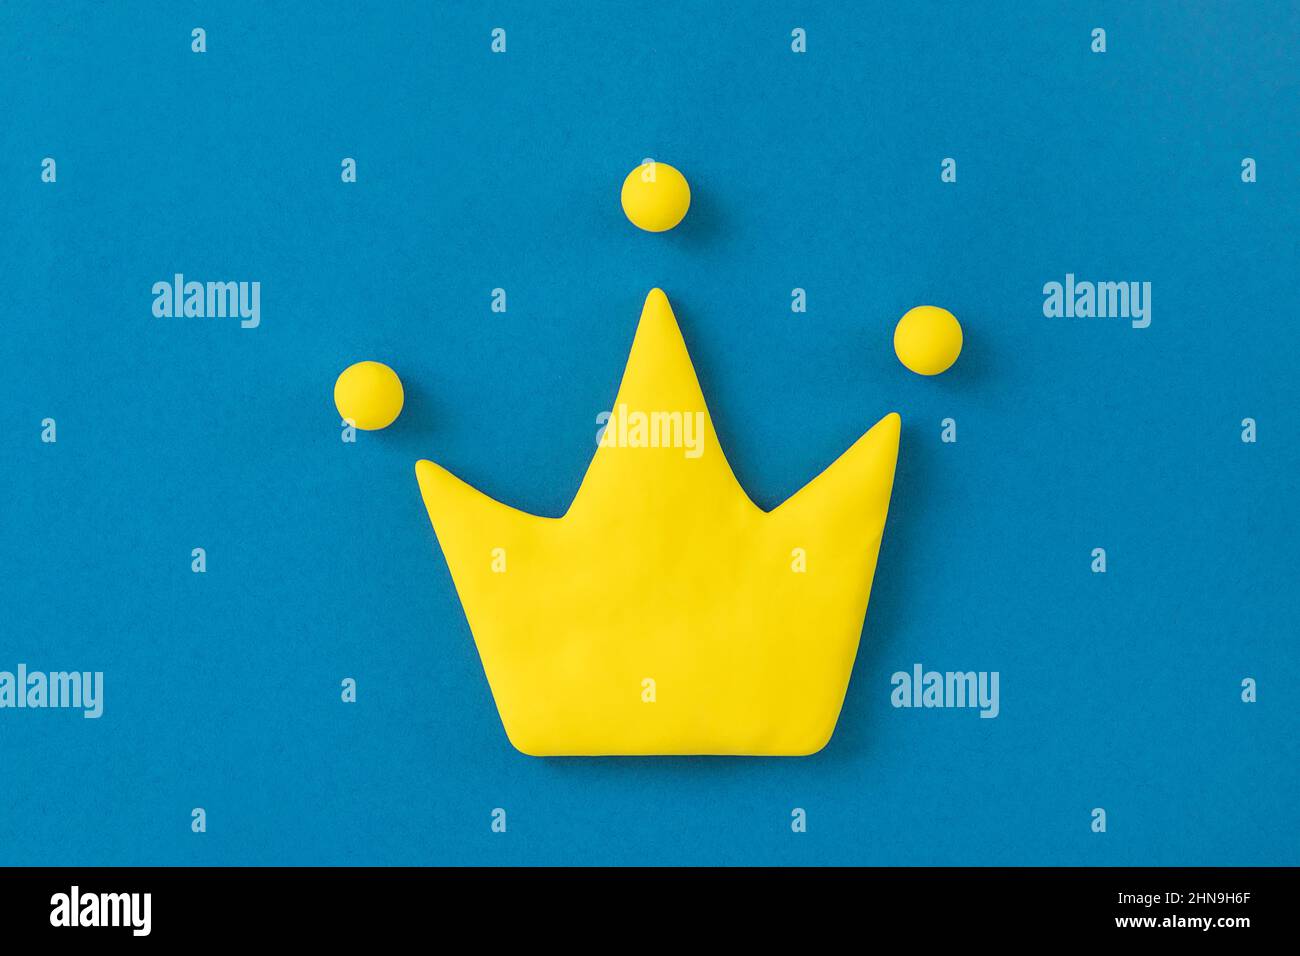 Simple 3d yellow crown symbol on blue background. Concept of win and success, top rank quality status. Stock Photo